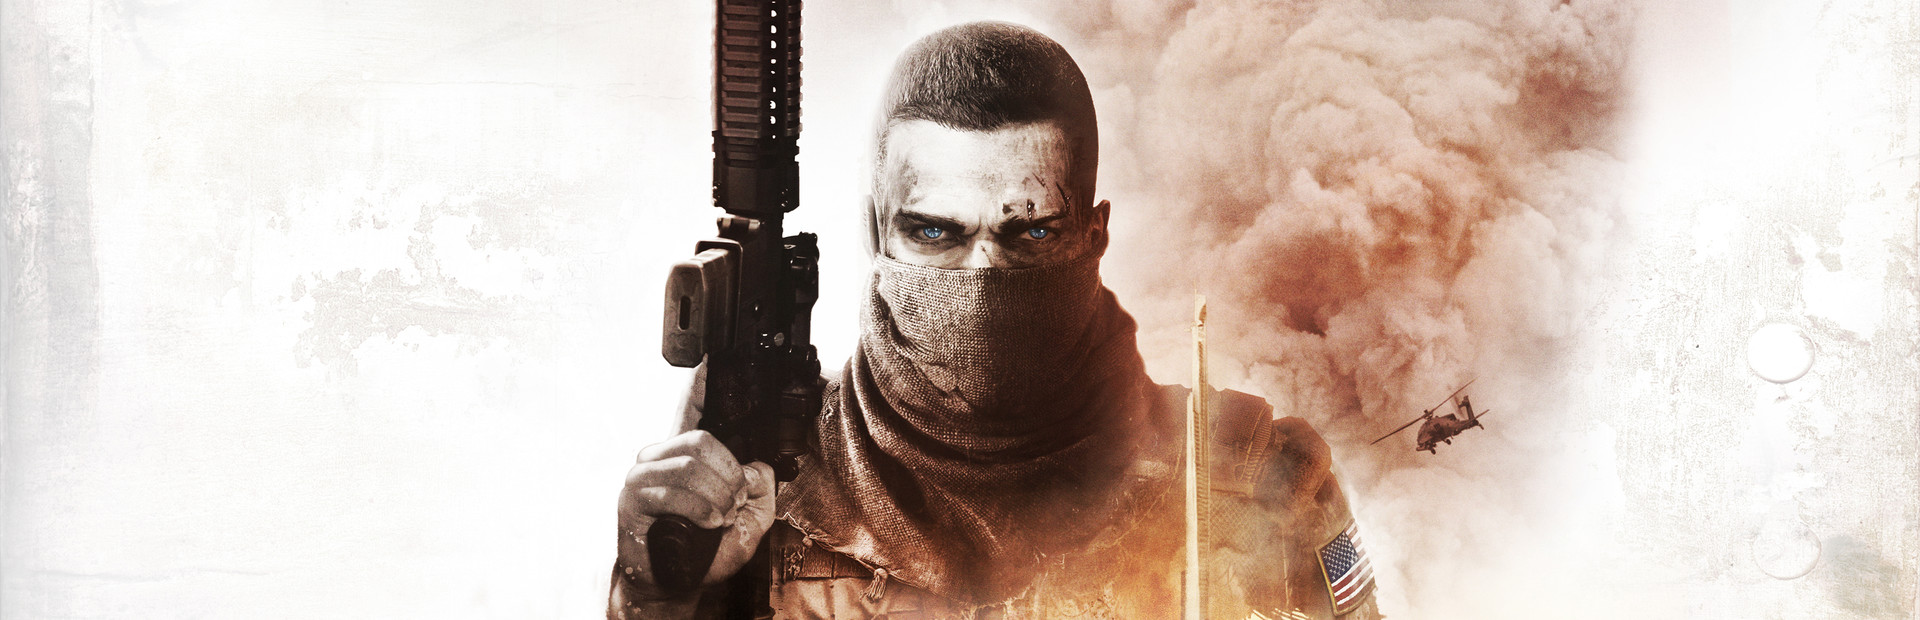 Spec Ops: The Line cover image